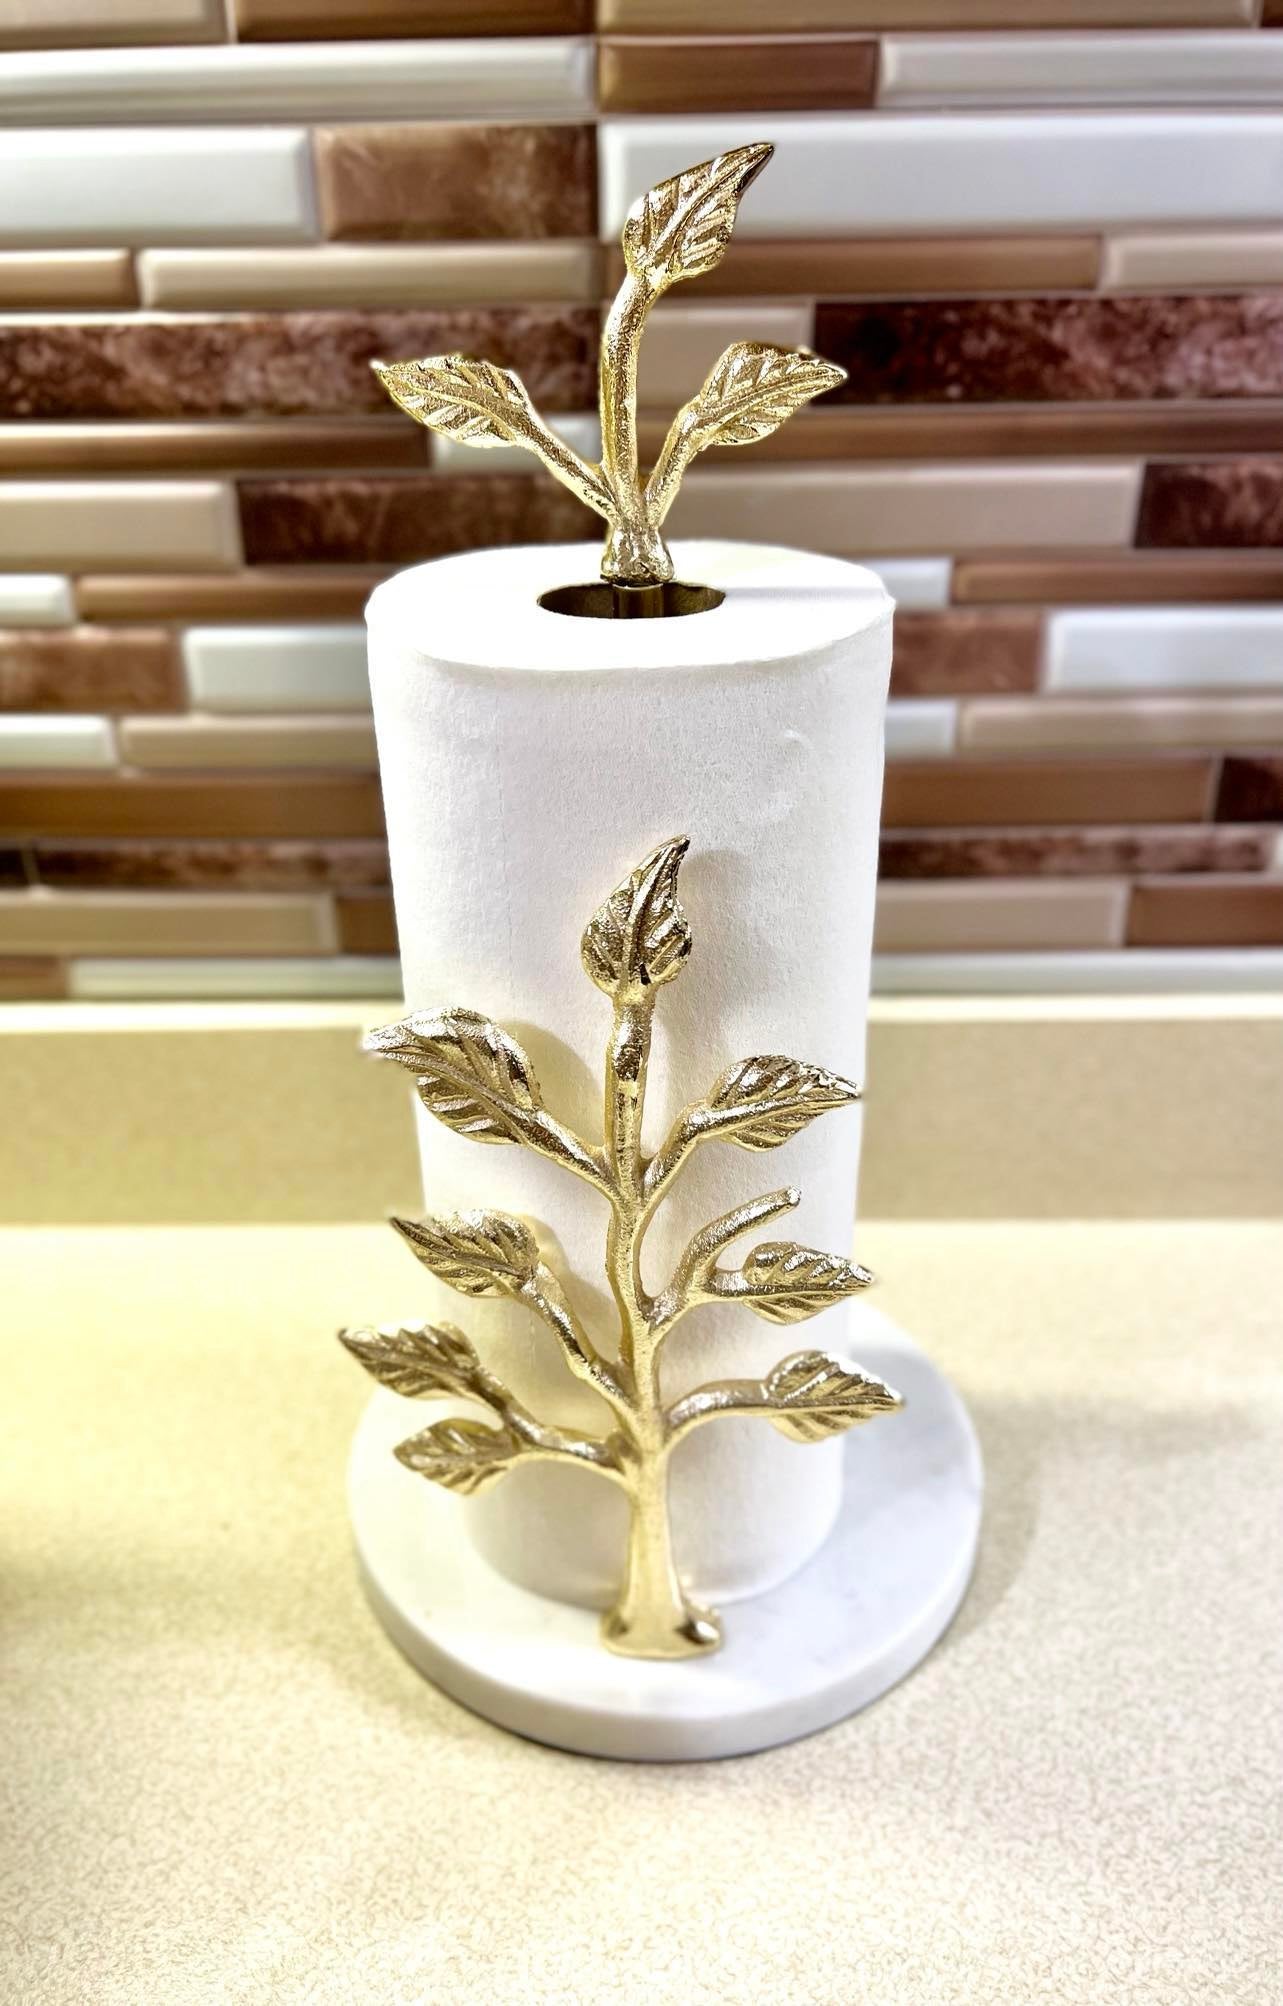 Kitchen Paper Towel Holder - Gold Tree Design with Marble Base